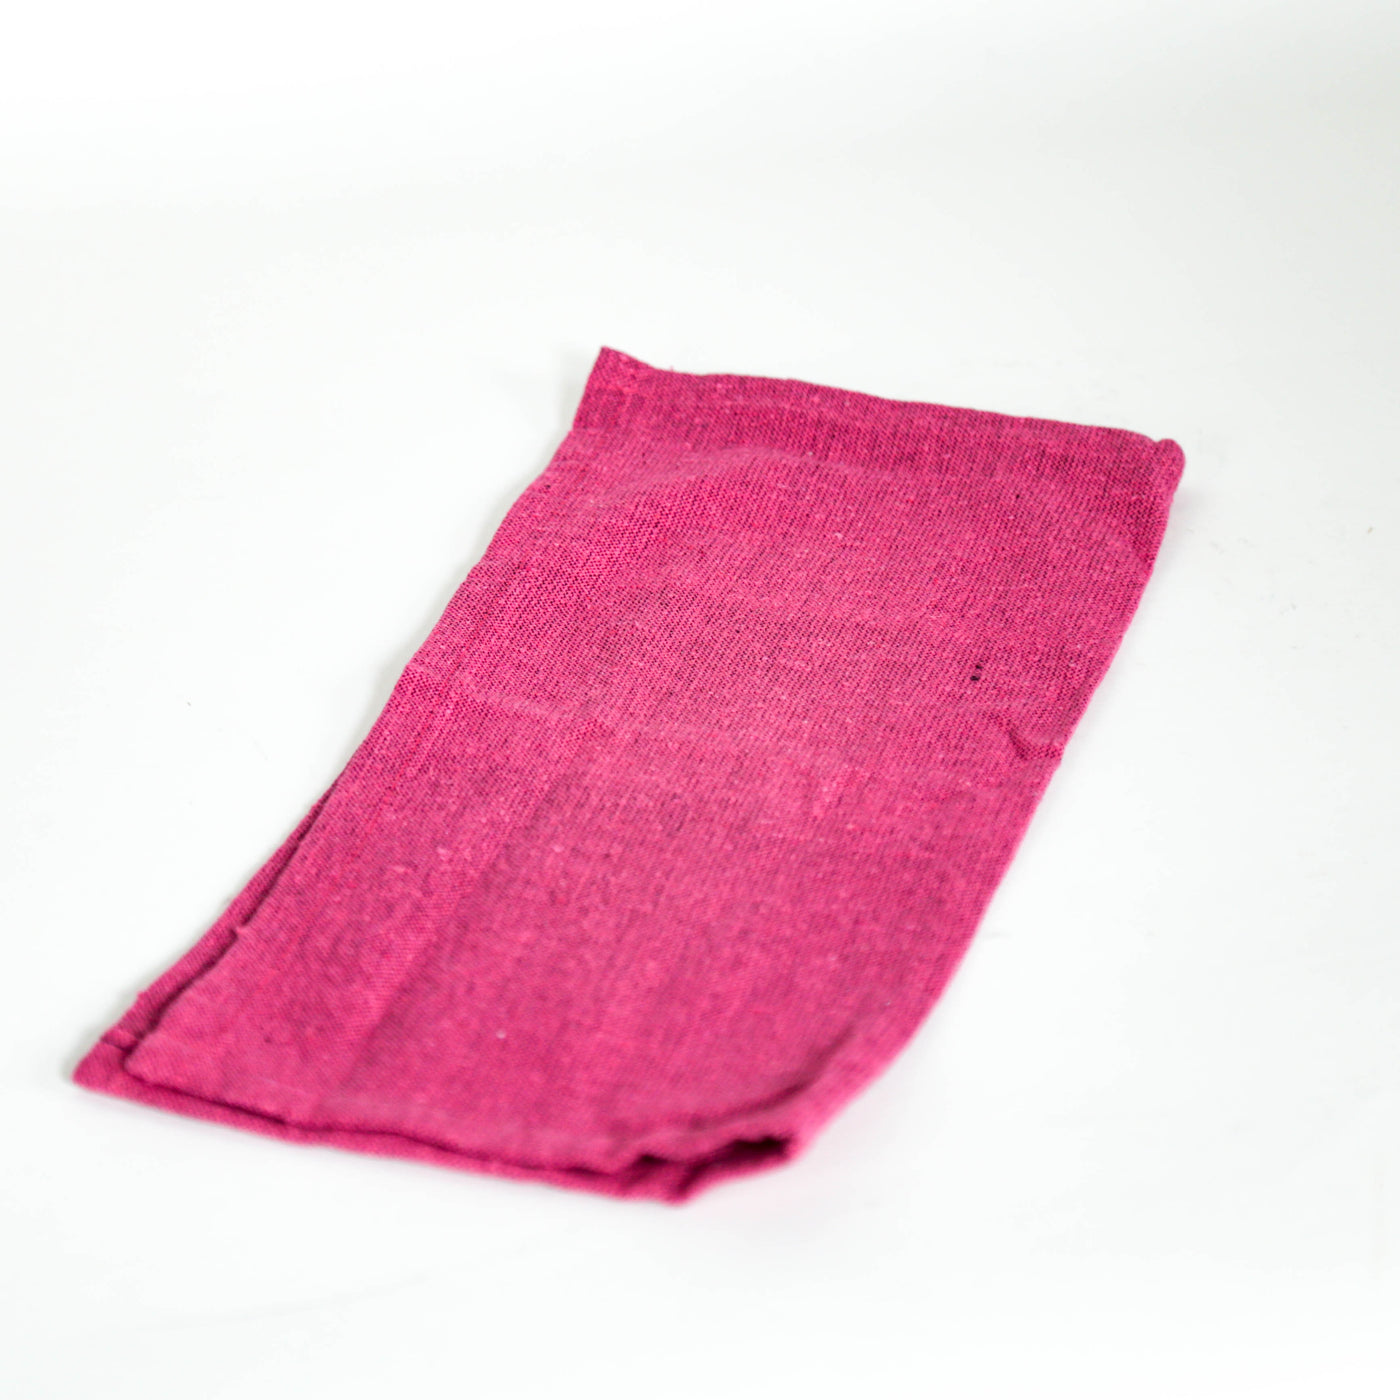 Oaxaca Colorful Napkins for your home decor